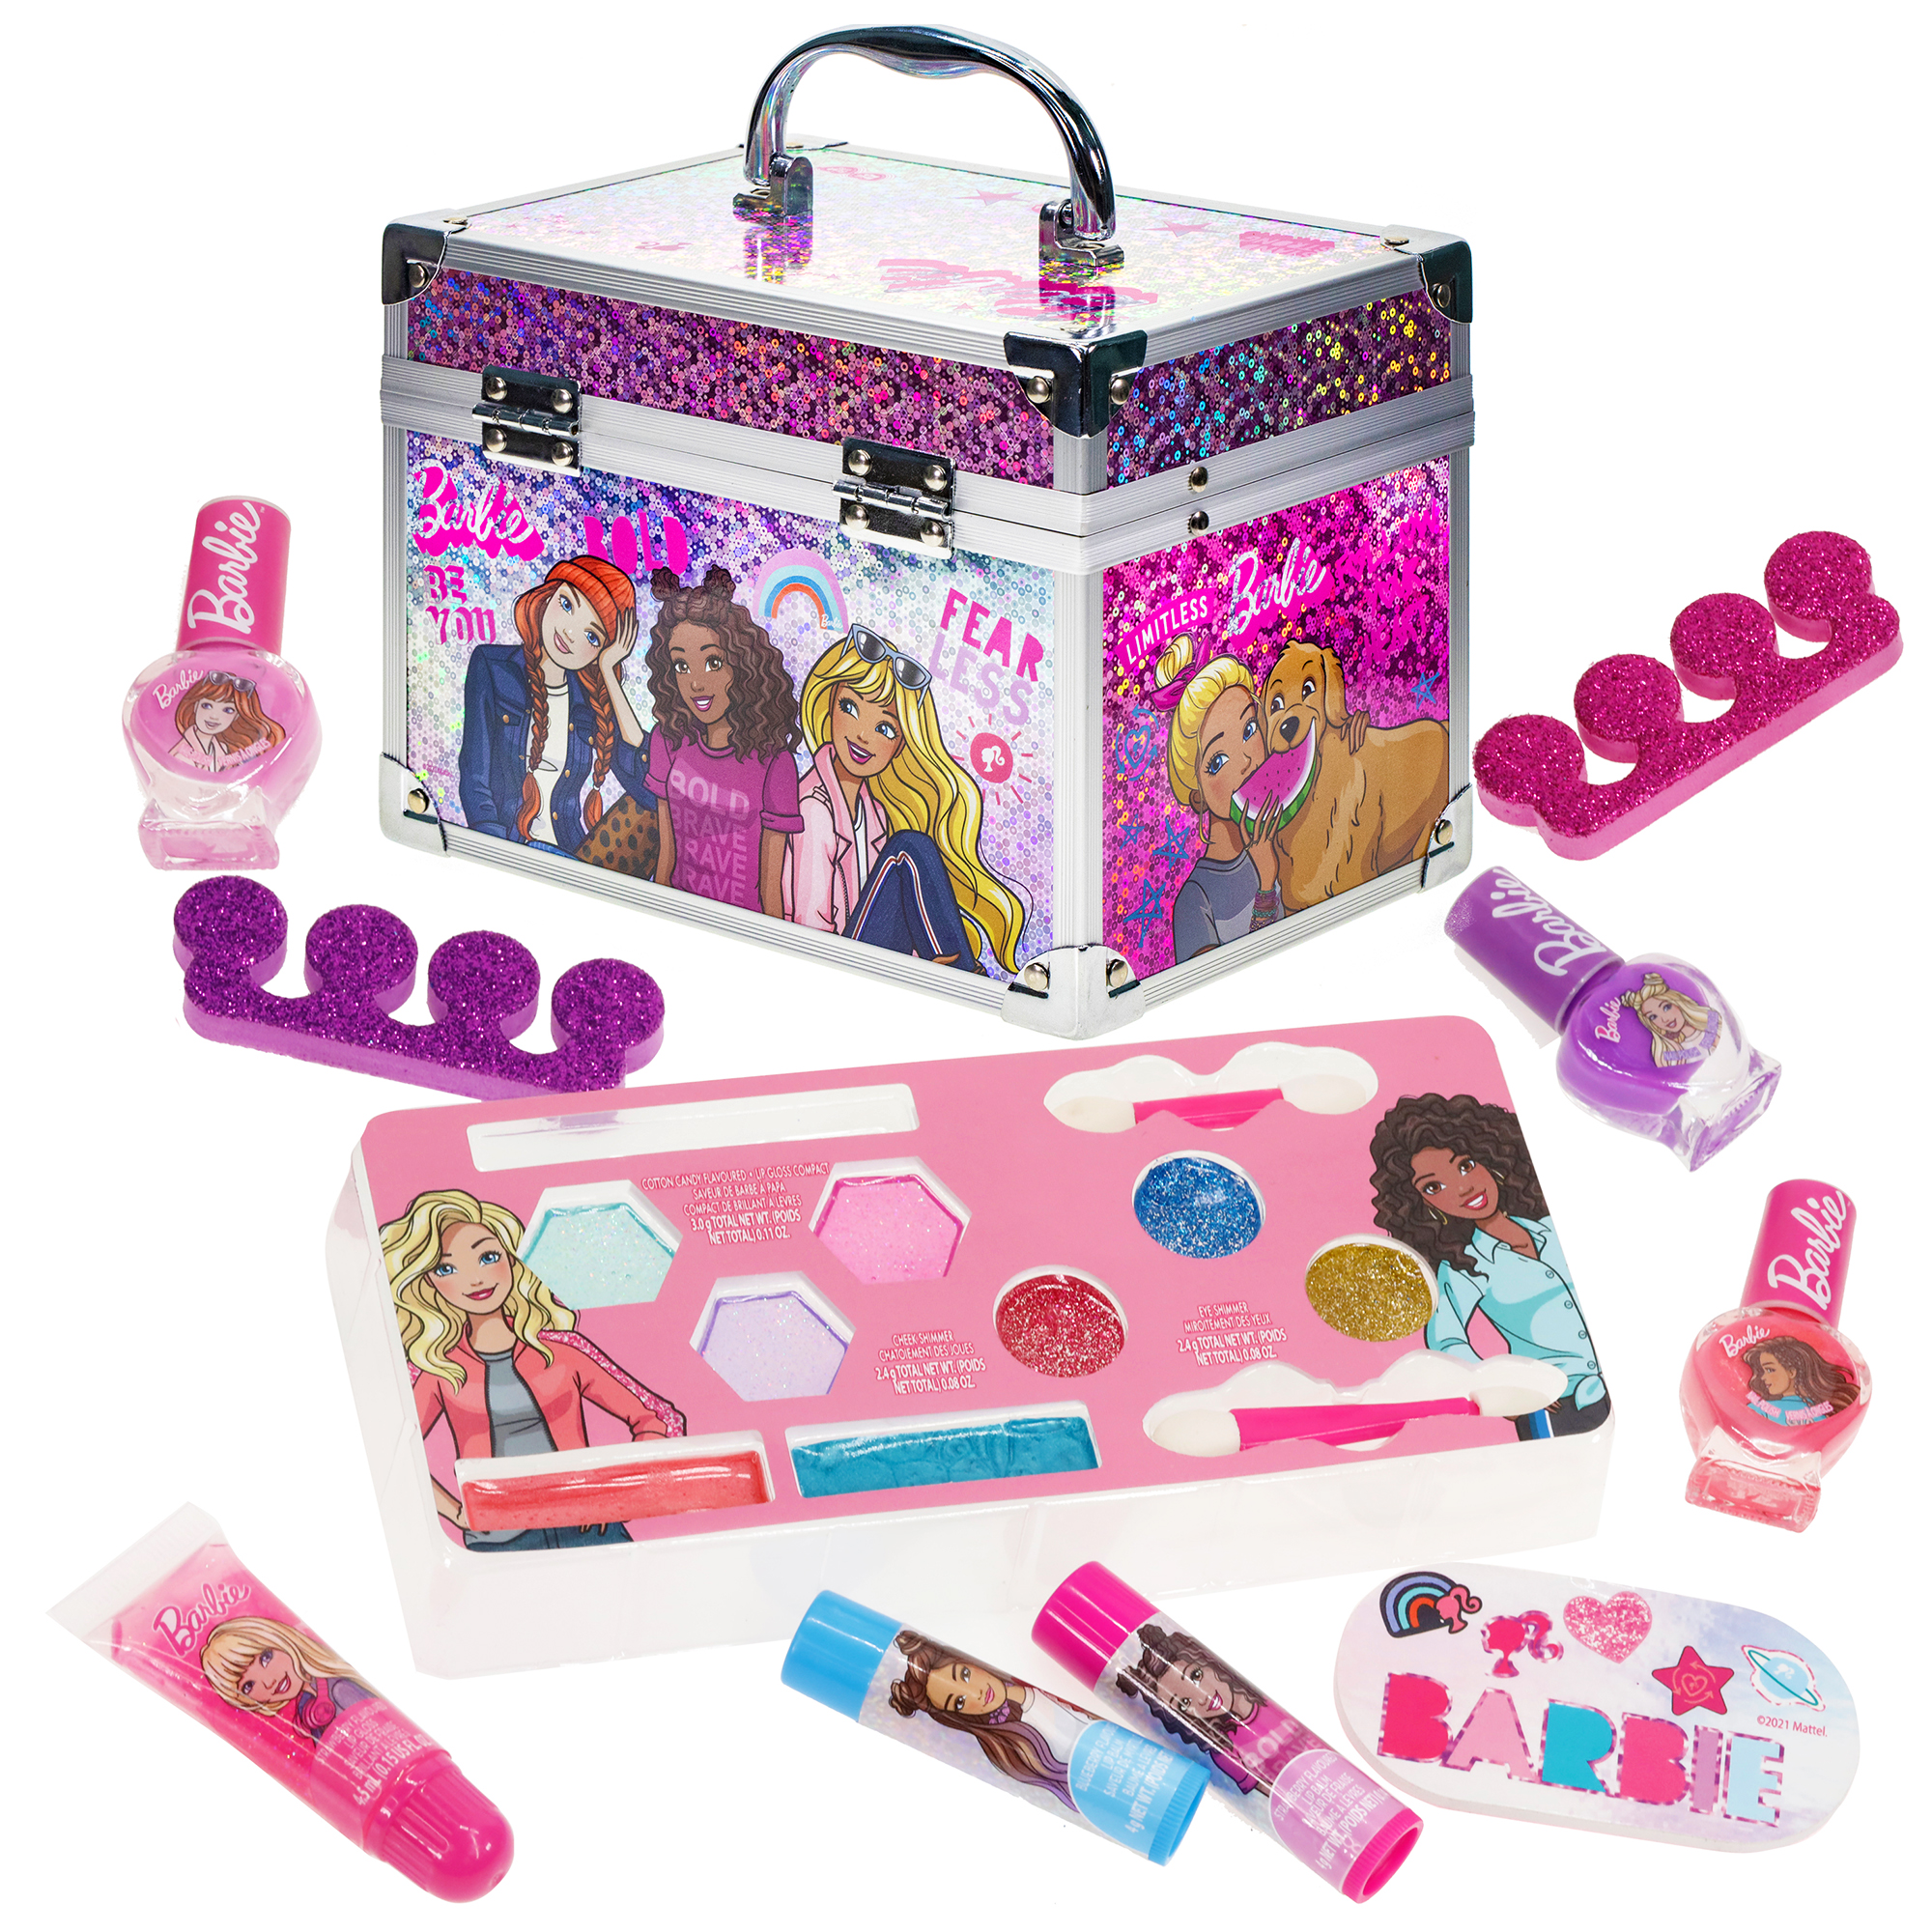 Barbie Train Case Pretend Play Cosmetic Set- Kids Beauty, Toy, Gift for Girls, Ages 3+ by Townley Girl - image 1 of 7